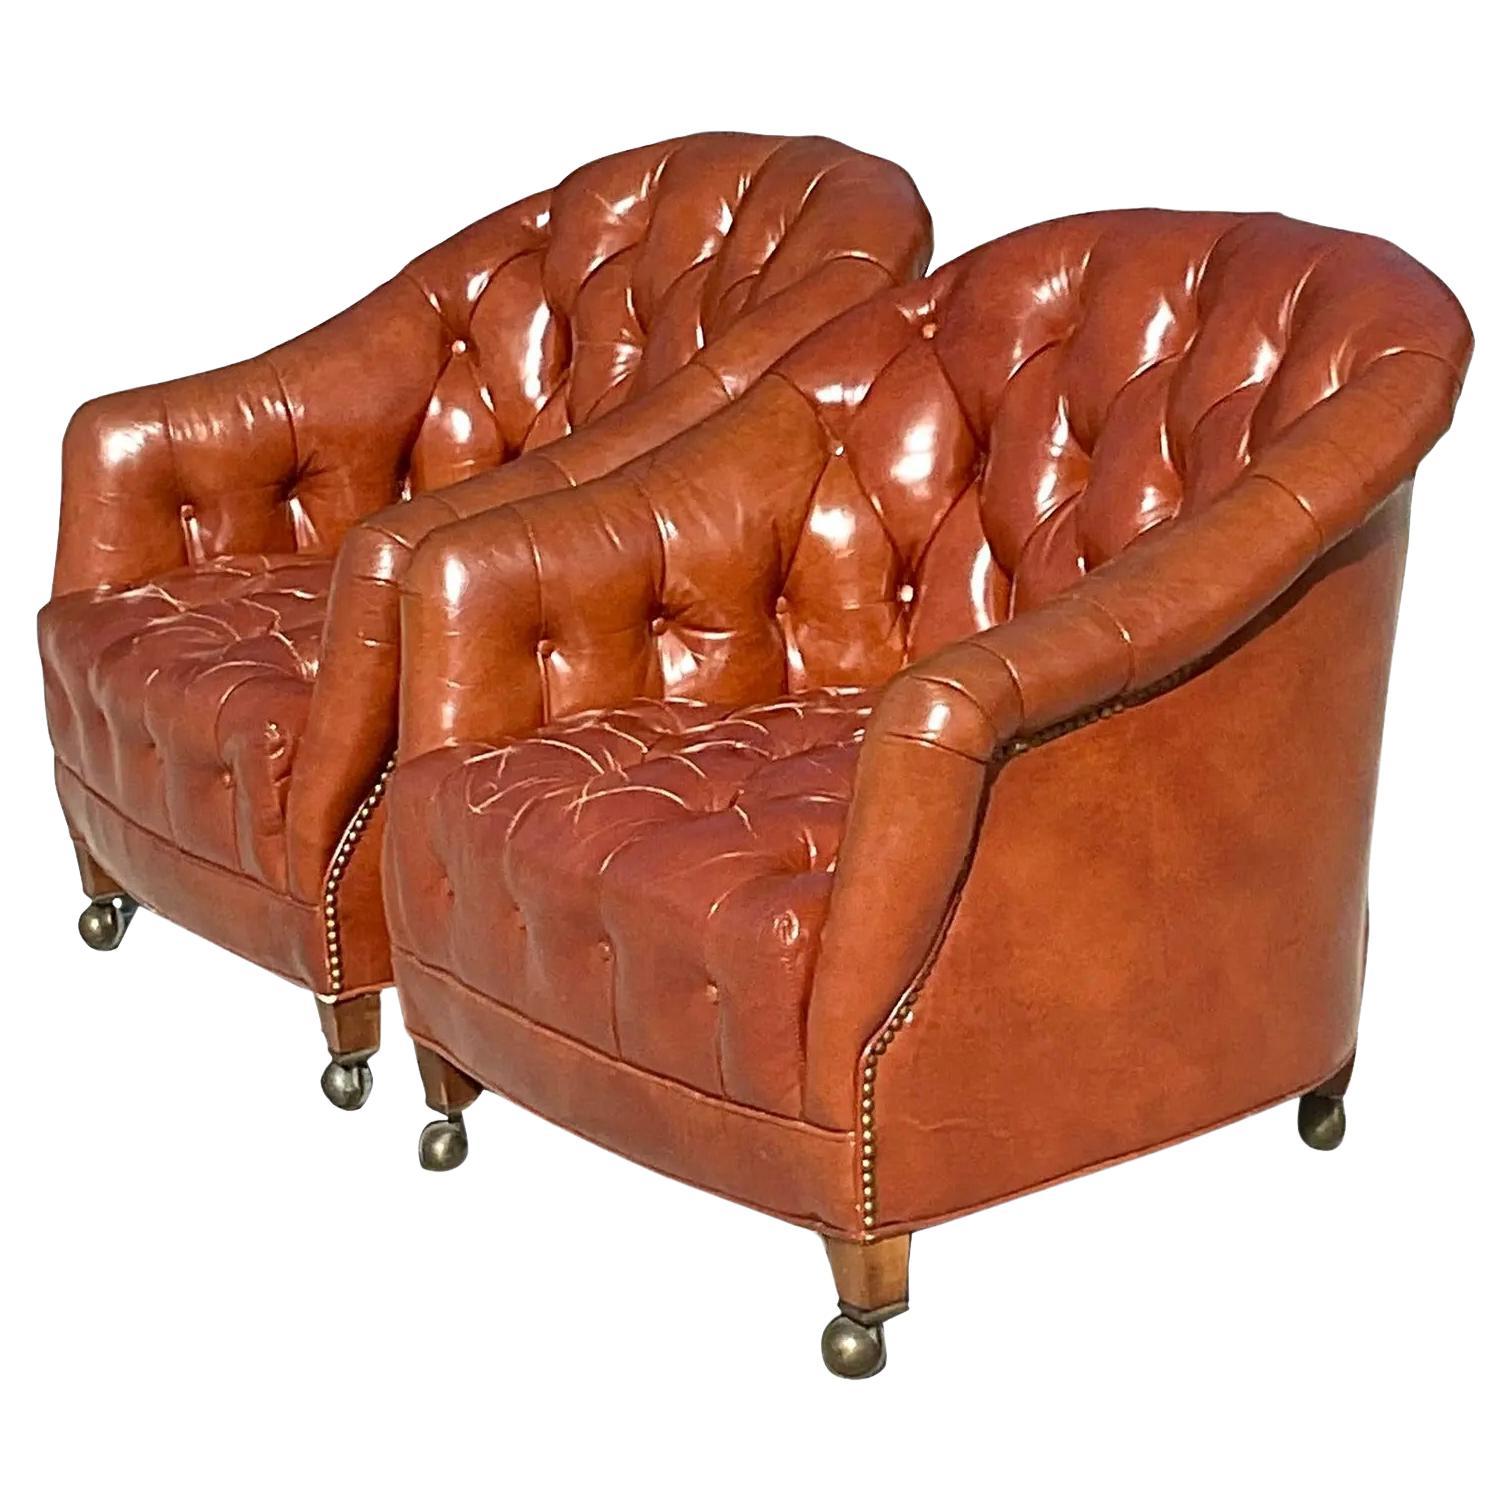 Hickory Chair Leather - 16 For Sale on 1stDibs